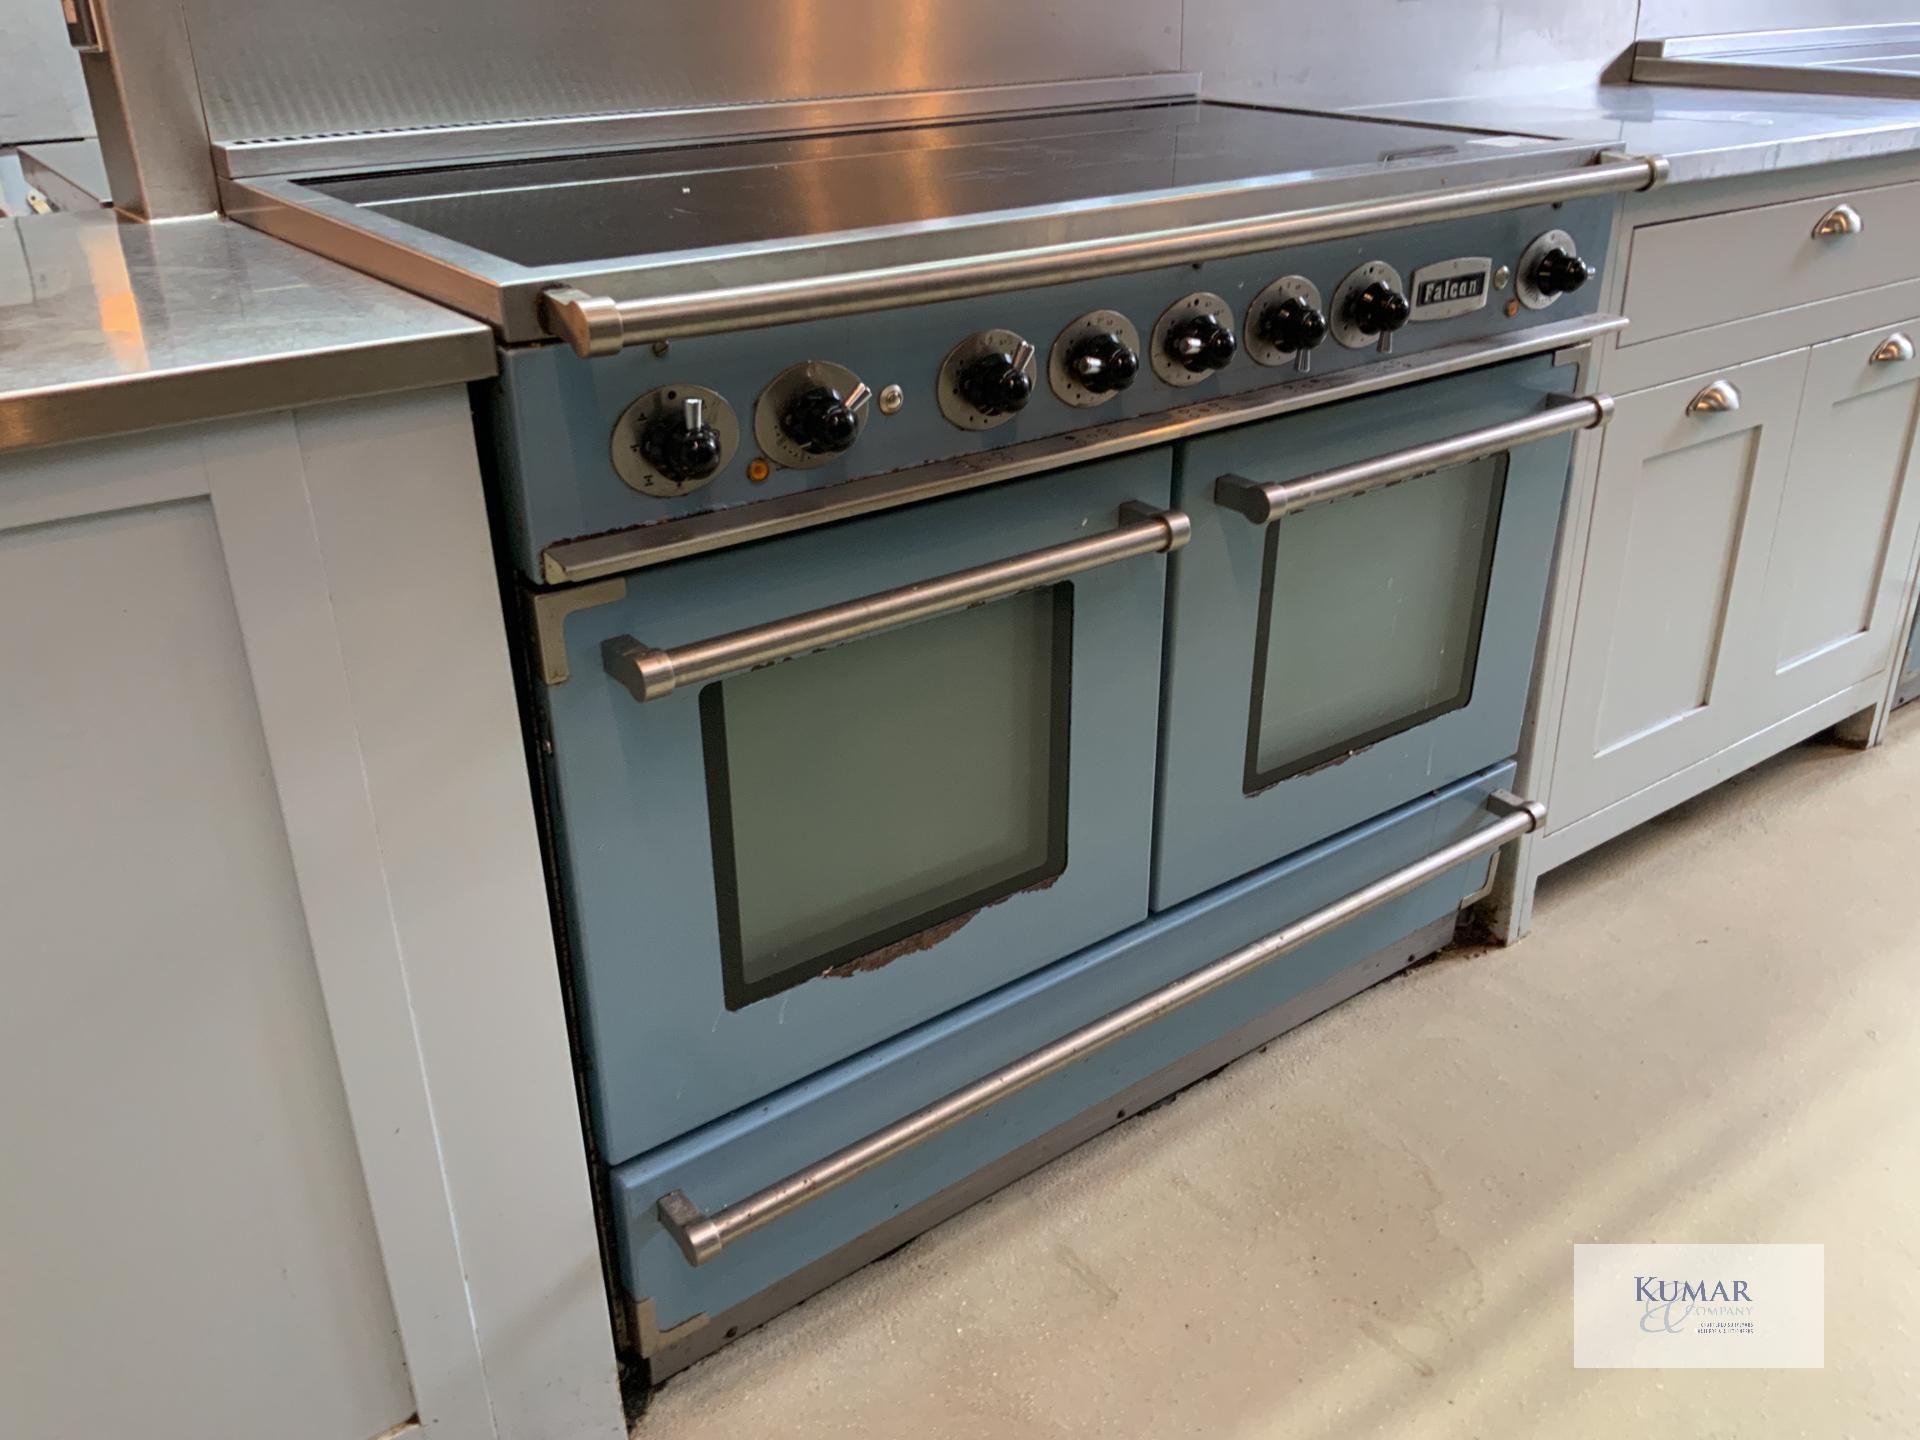 China Blue Aga Rangemaster Falcon Continental 1092 Range Cookers with Twin Ovens & 5 Position